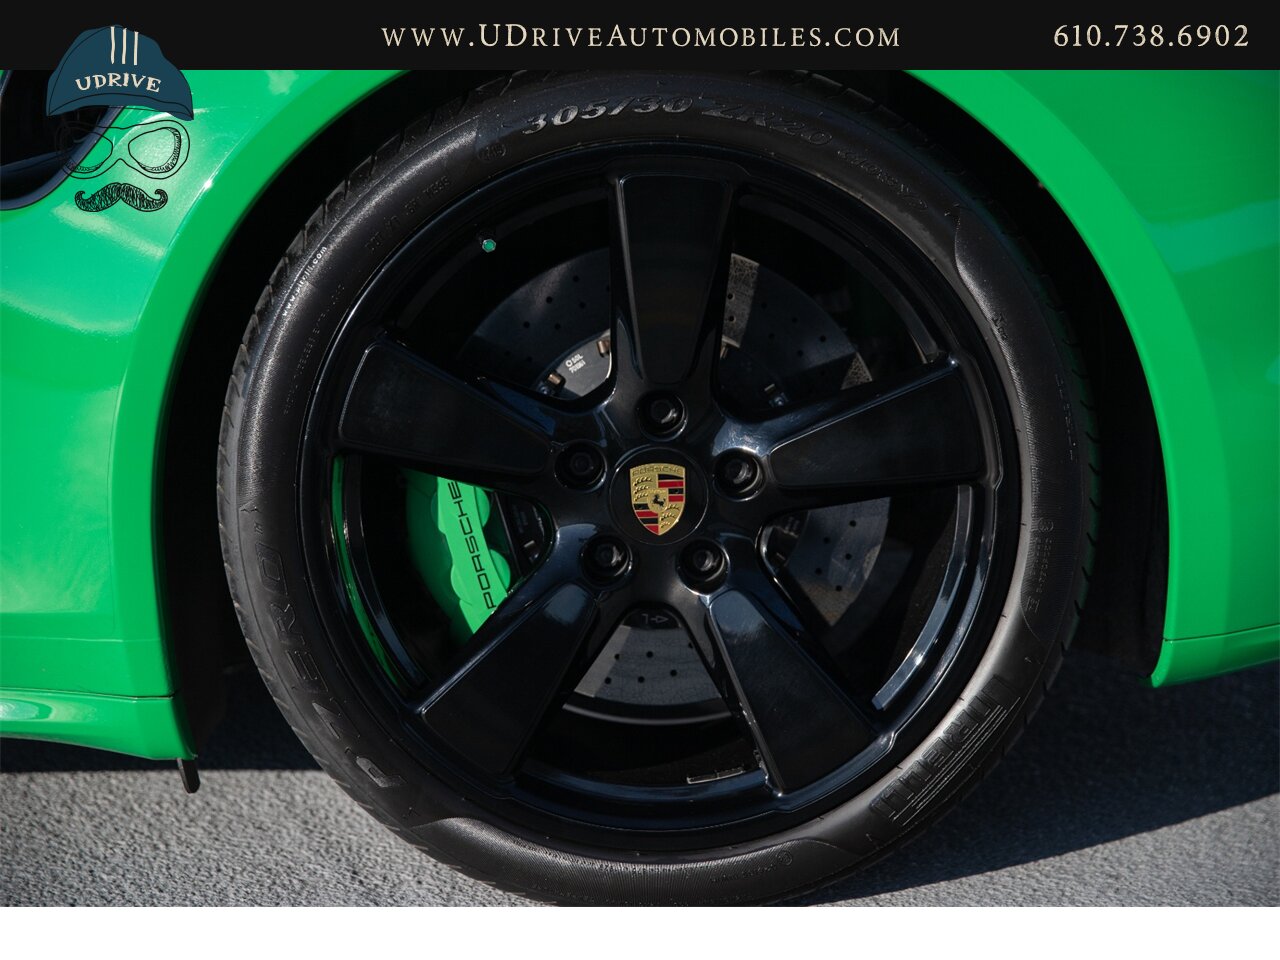 2016 Porsche 911 Turbo S PTS Viper Green Aerokit $203k MSRP  Painted Side Skirts Painted Grilles Wheels in Black - Photo 45 - West Chester, PA 19382